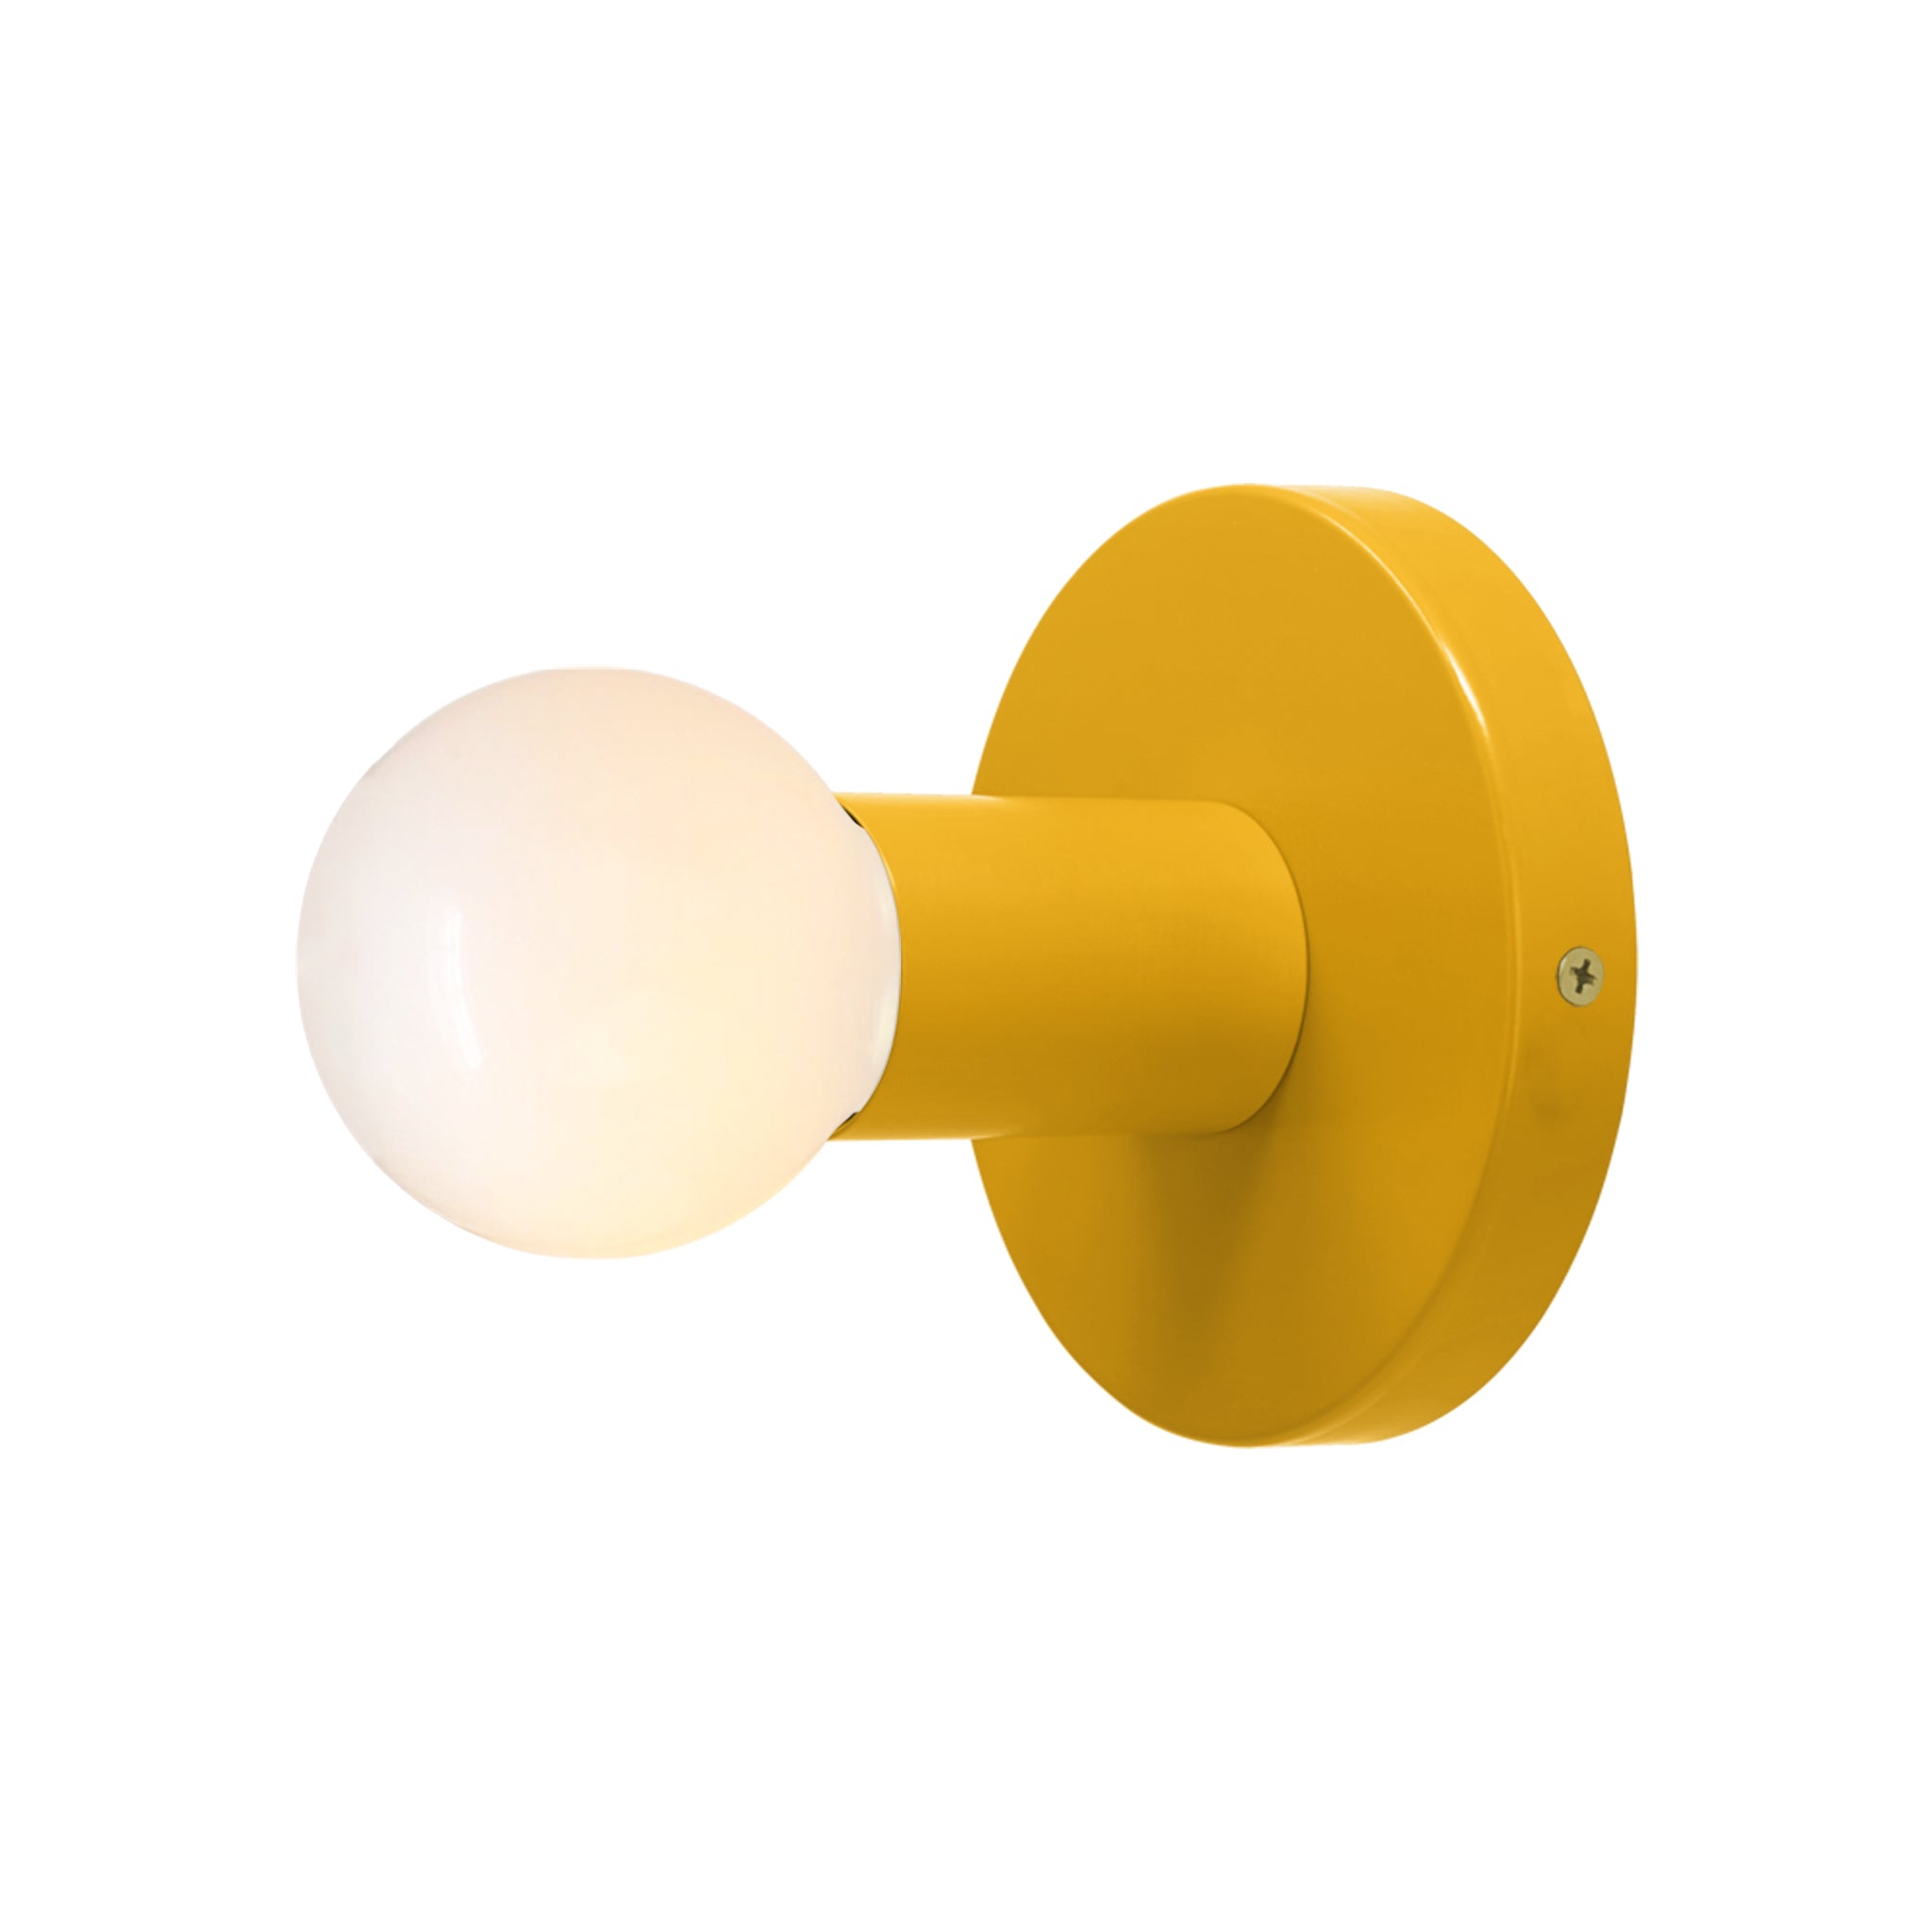 Brass and ochre color Twink sconce Dutton Brown lighting